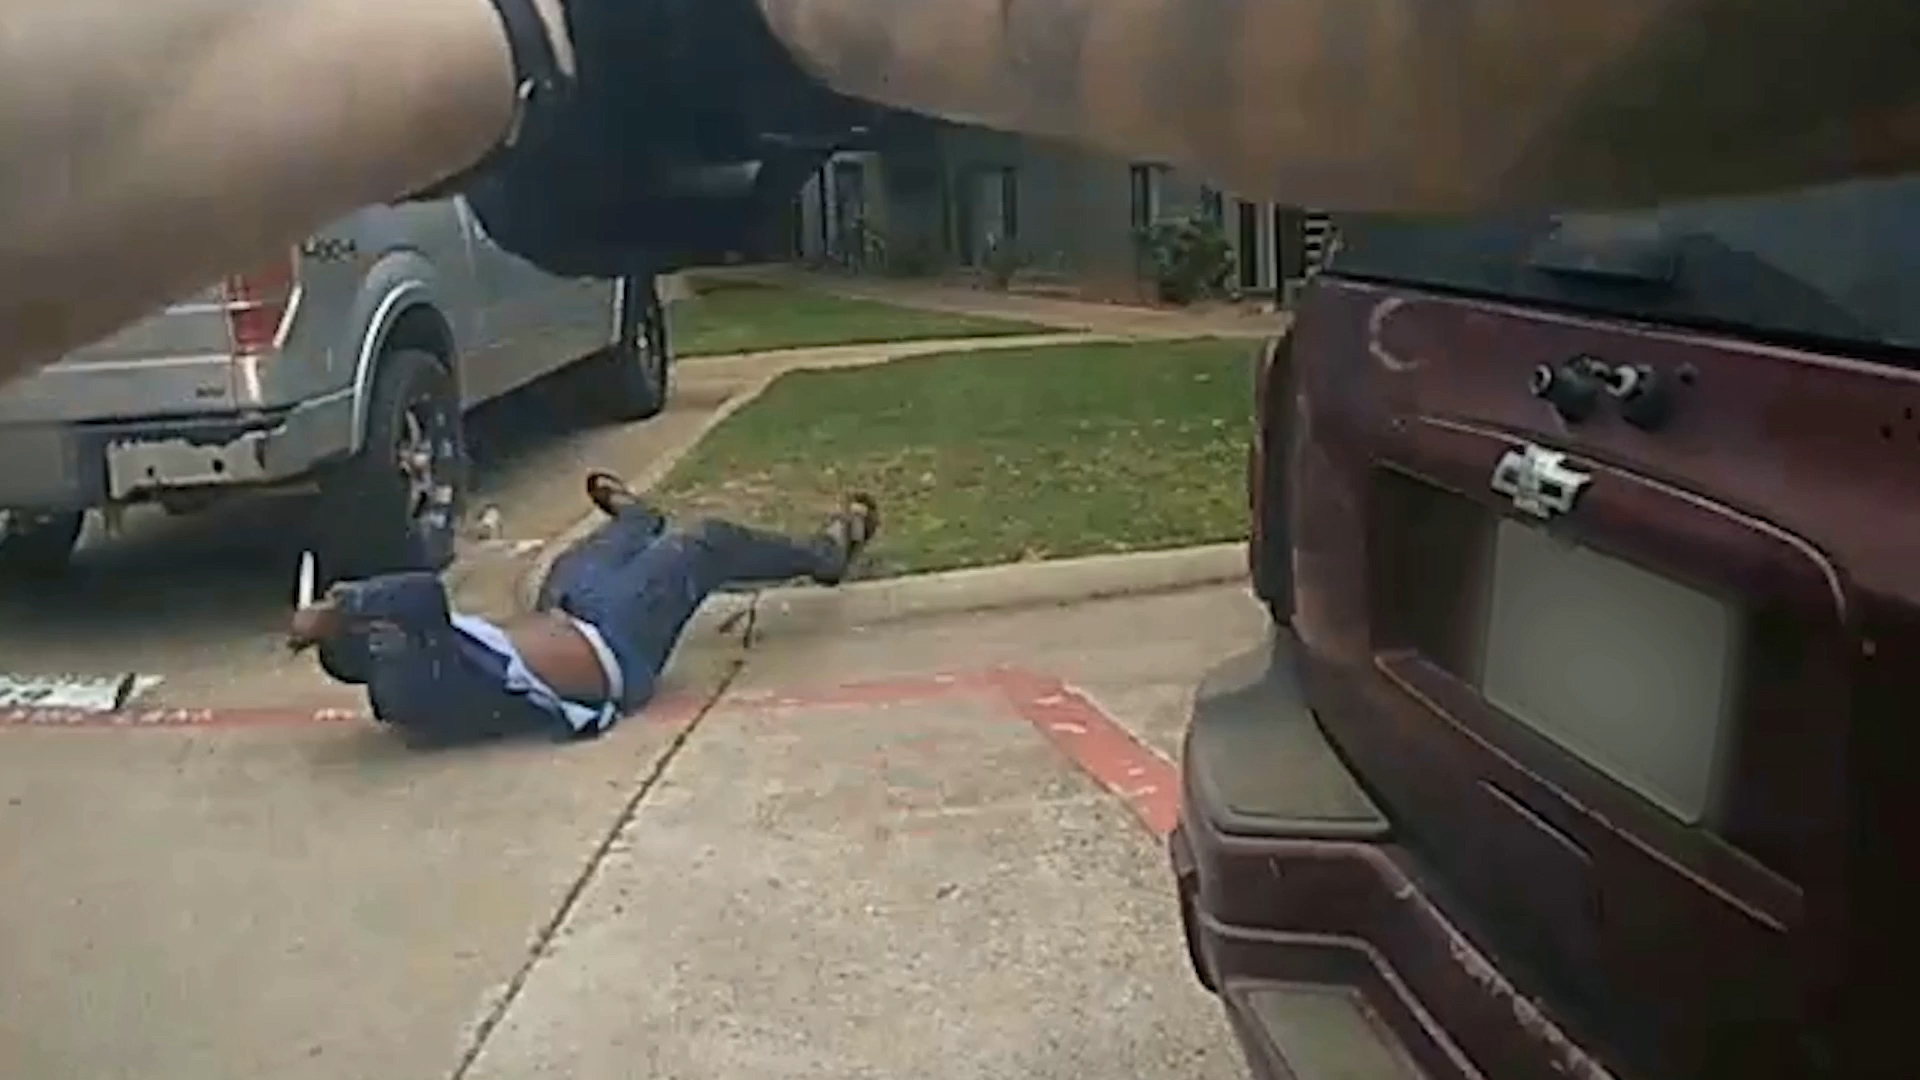 The Arlington Police Department released 911 audio and portions of body-worn camera footage from an officer-involved shooting that occurred on April 25.